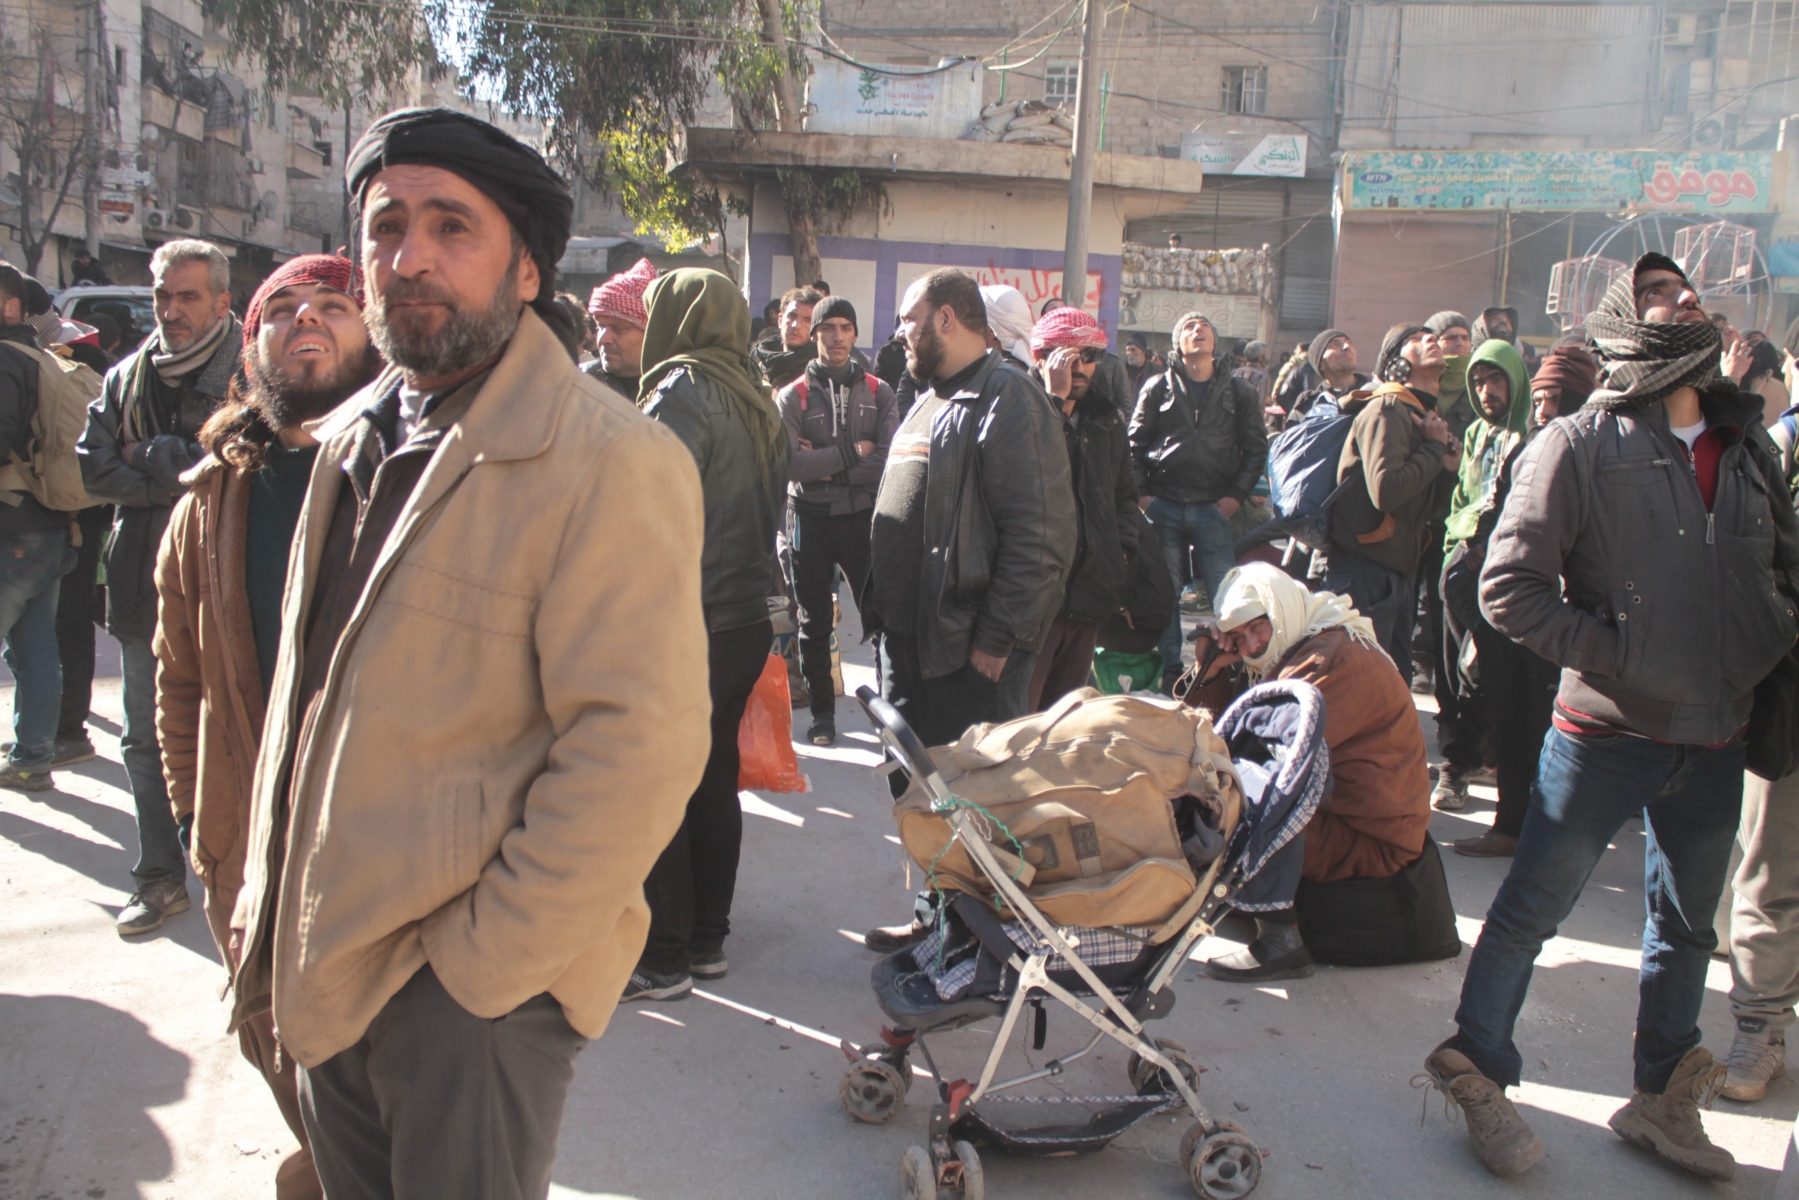 epa05677965 People wait in the street during the evacuation, Aleppo, Syria, 15 December 2016 (issued 16 December 2016). Evacuation of civilians from the rebel-held parts of Aleppo was suspended according to news reports on 16 December 2016. Aleppo's residents have been under siege for weeks and have suffered bombardment, together with chronic food and fuel shortages.  EPA/GHITH SY SYRIA ALEPPO EVACUATION